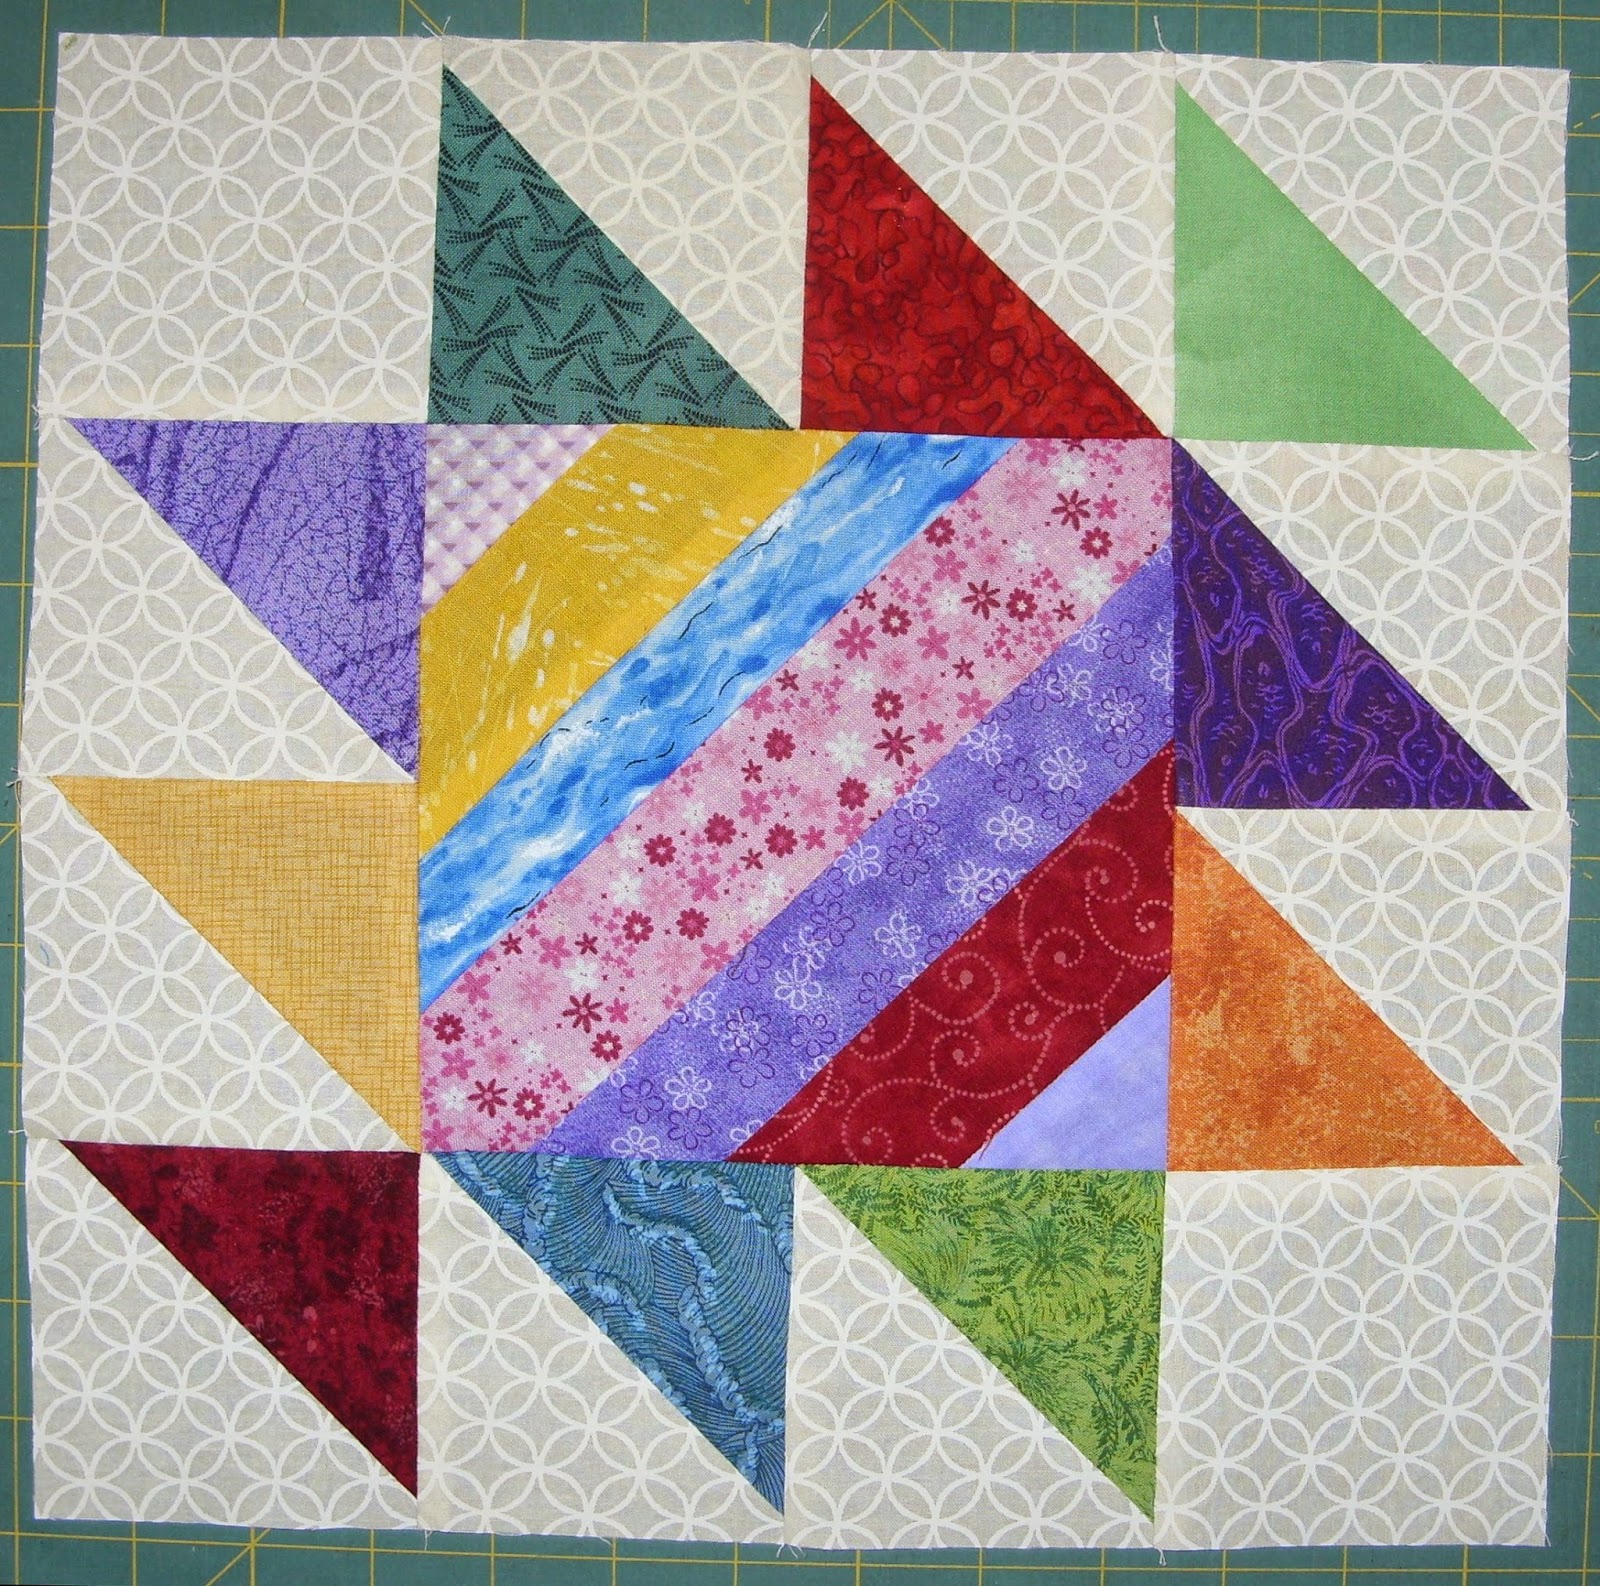 Elizabeth's Quilt Projects: Plan for Strings and Scraps